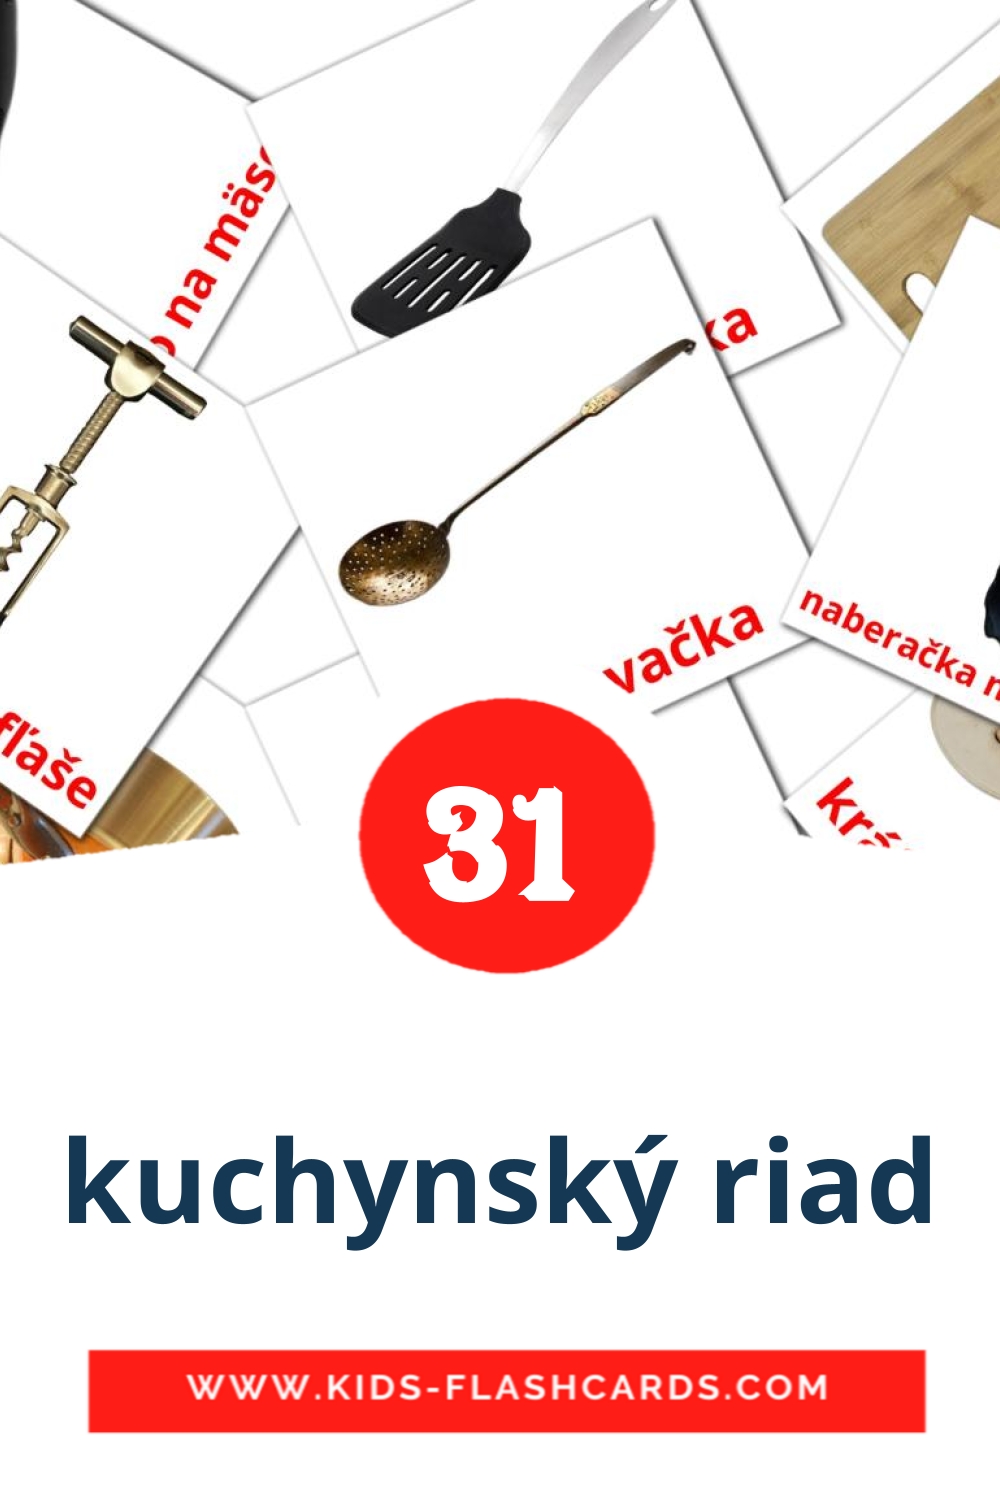 35 kuchynský riad Picture Cards for Kindergarden in slovak